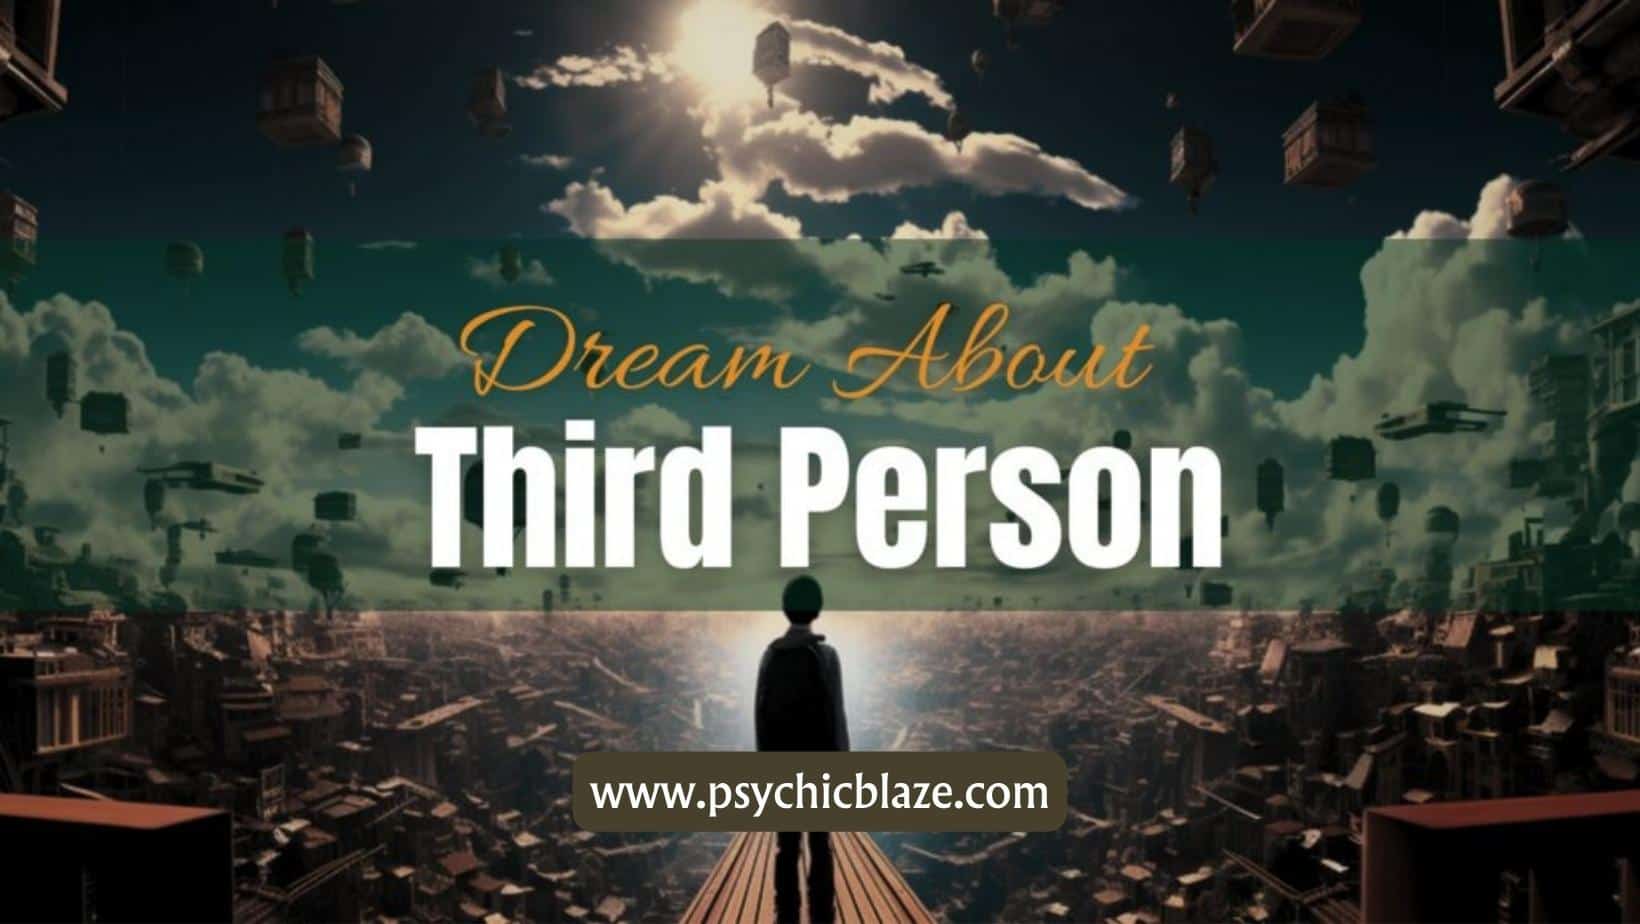 Dream about Third Person